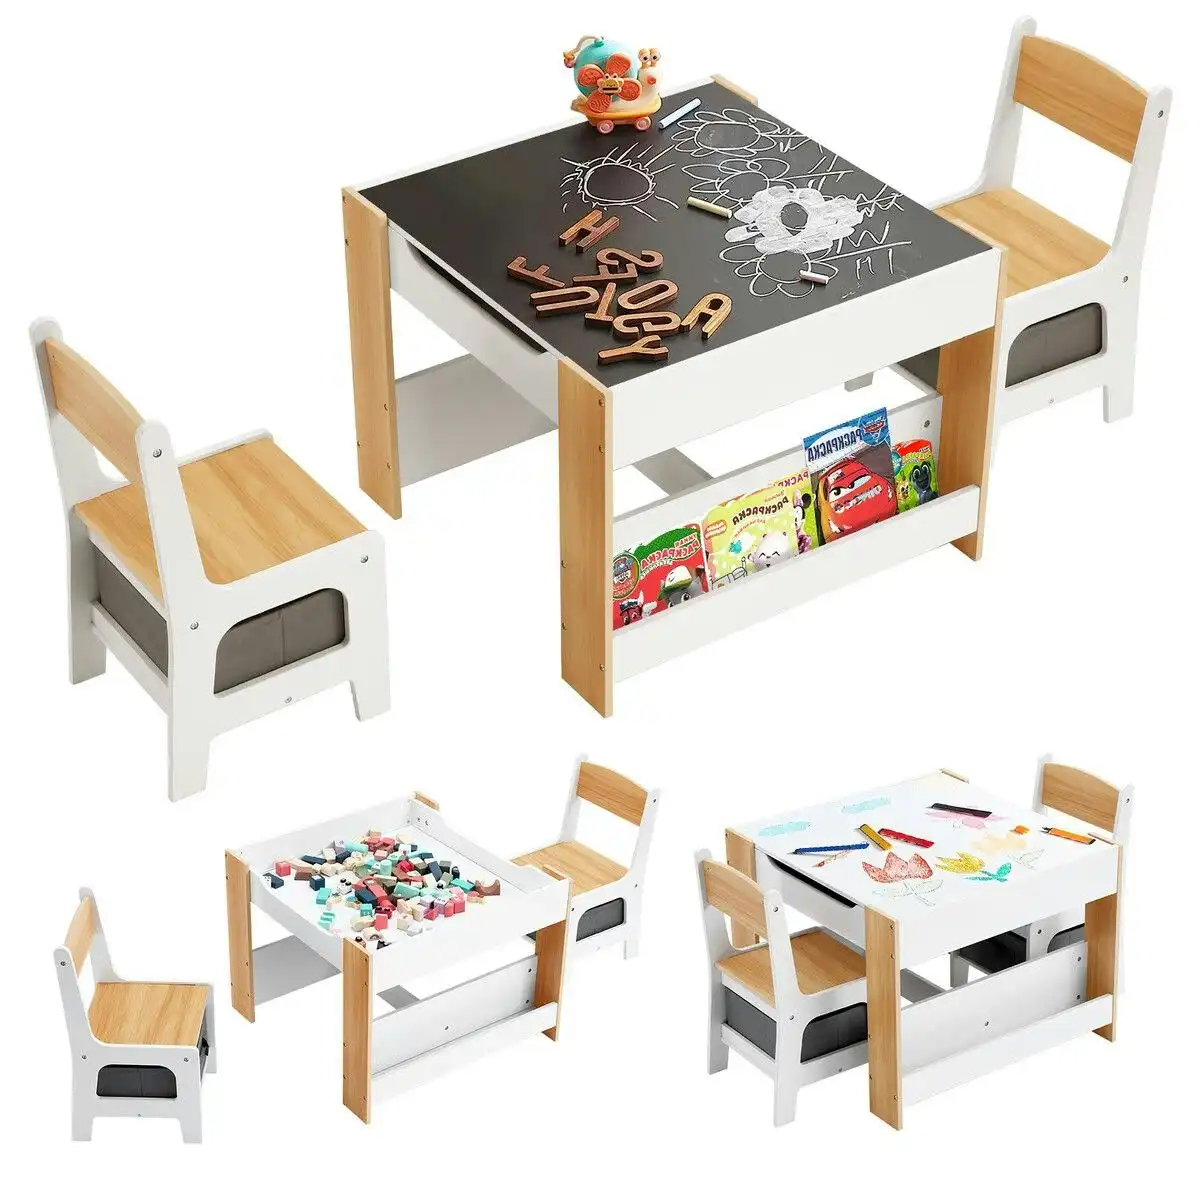 Kidbot 4 IN 1 Kids Table and Chairs Set Childrens Activity Centre Picnic Play Study Furniture Indoor Outdoor Drawing Art Gaming Craft Book Storage Desk